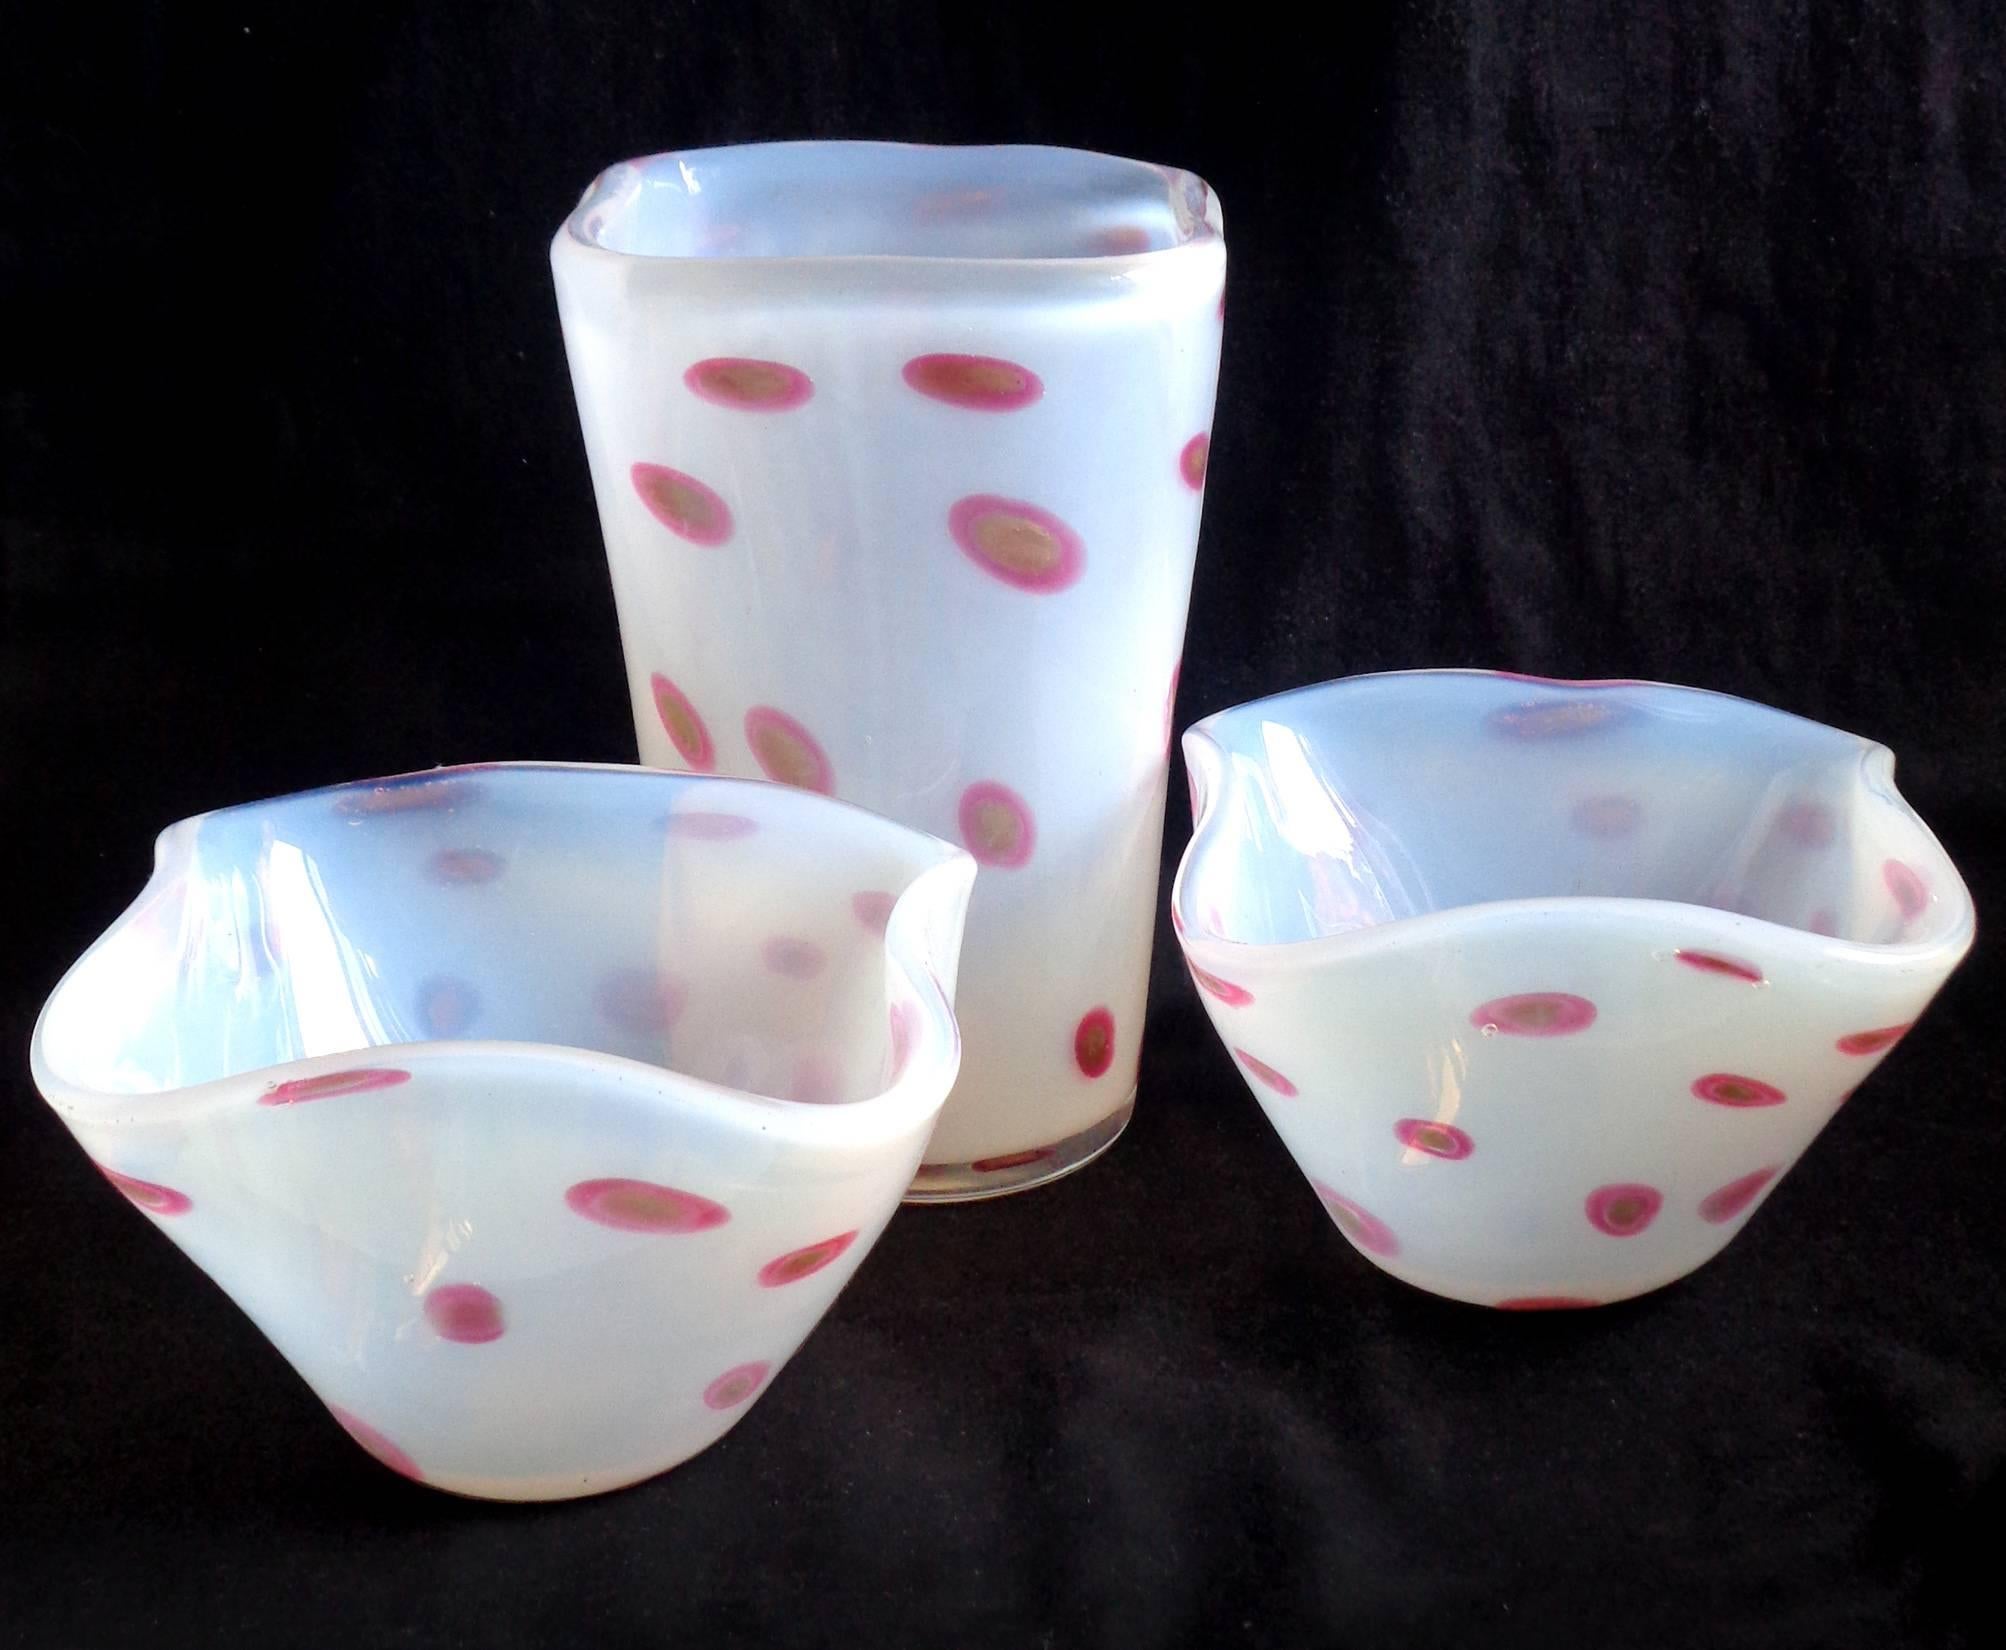 Beautiful vintage Murano hand blown opalescent white, and pink with aventurine spots Italian art glass vase and bowls set. Documented to the Fratelli Toso company. The pieces have a squared rim with round bottoms. They can be used as display pieces